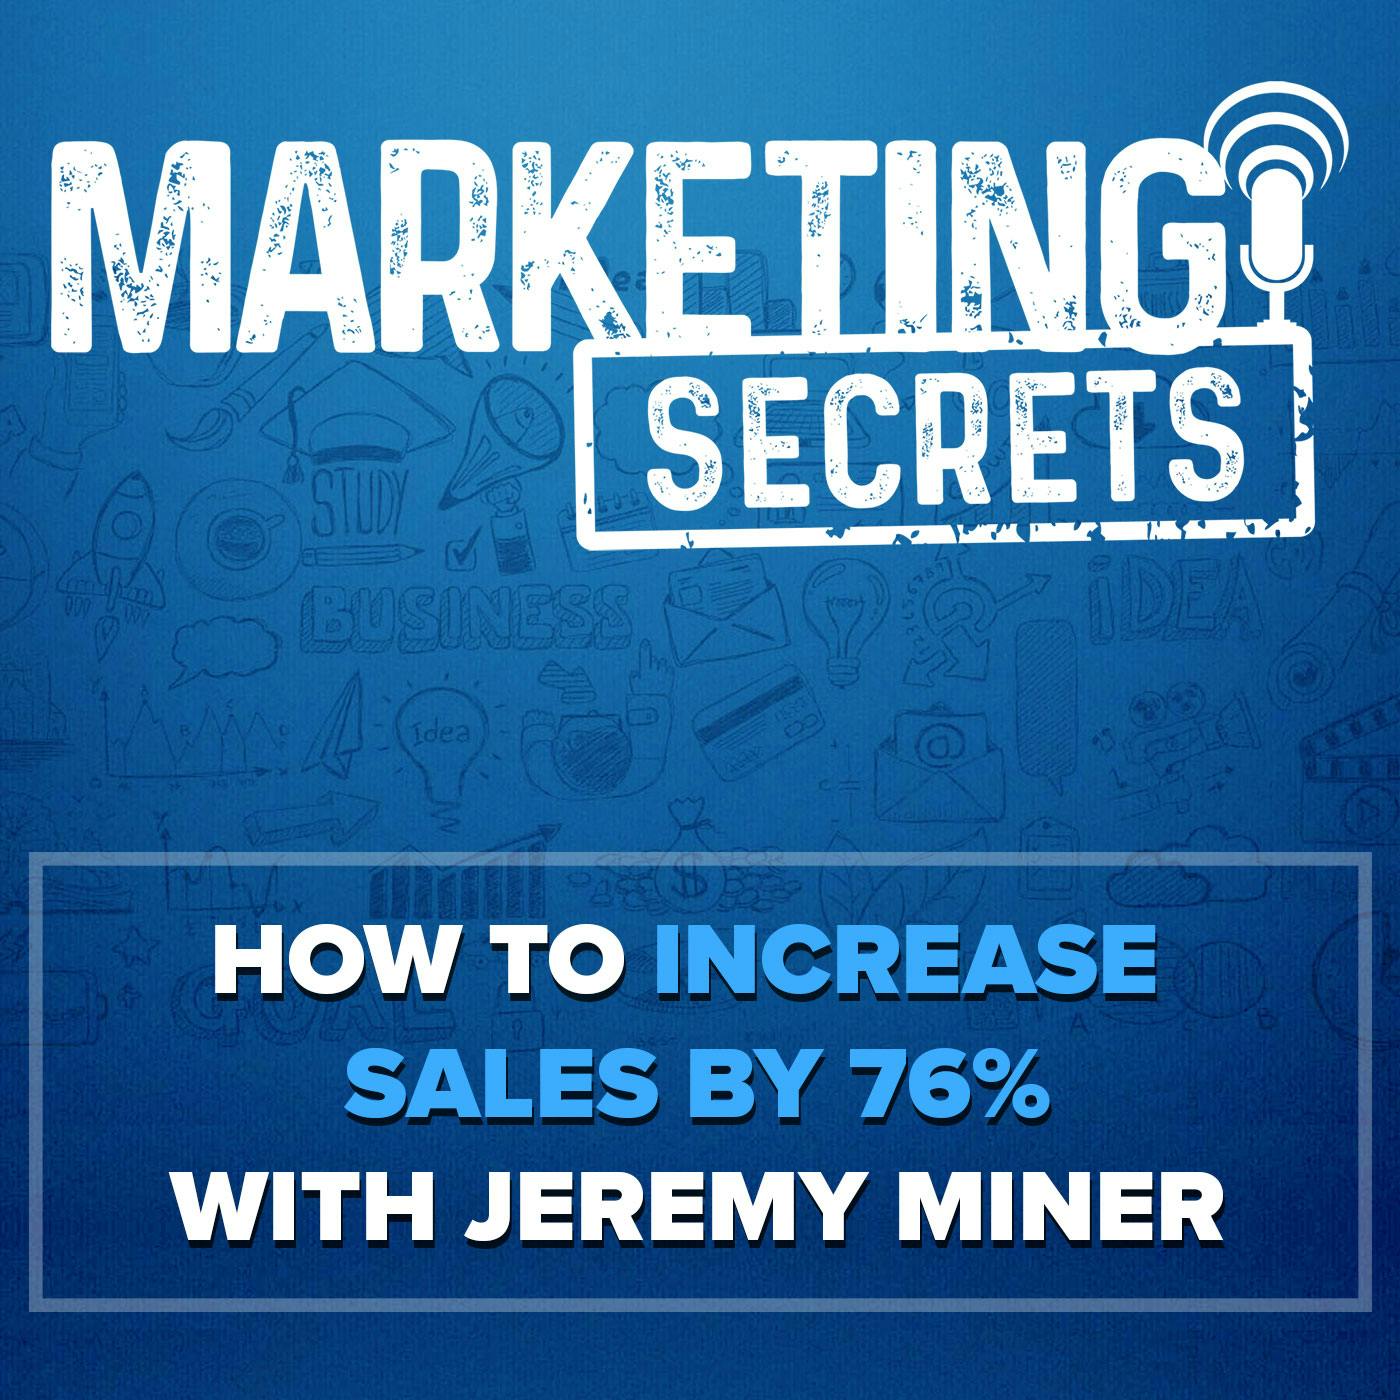 How to Increase Sales by 76% - with Jeremy Miner by Russell Brunson